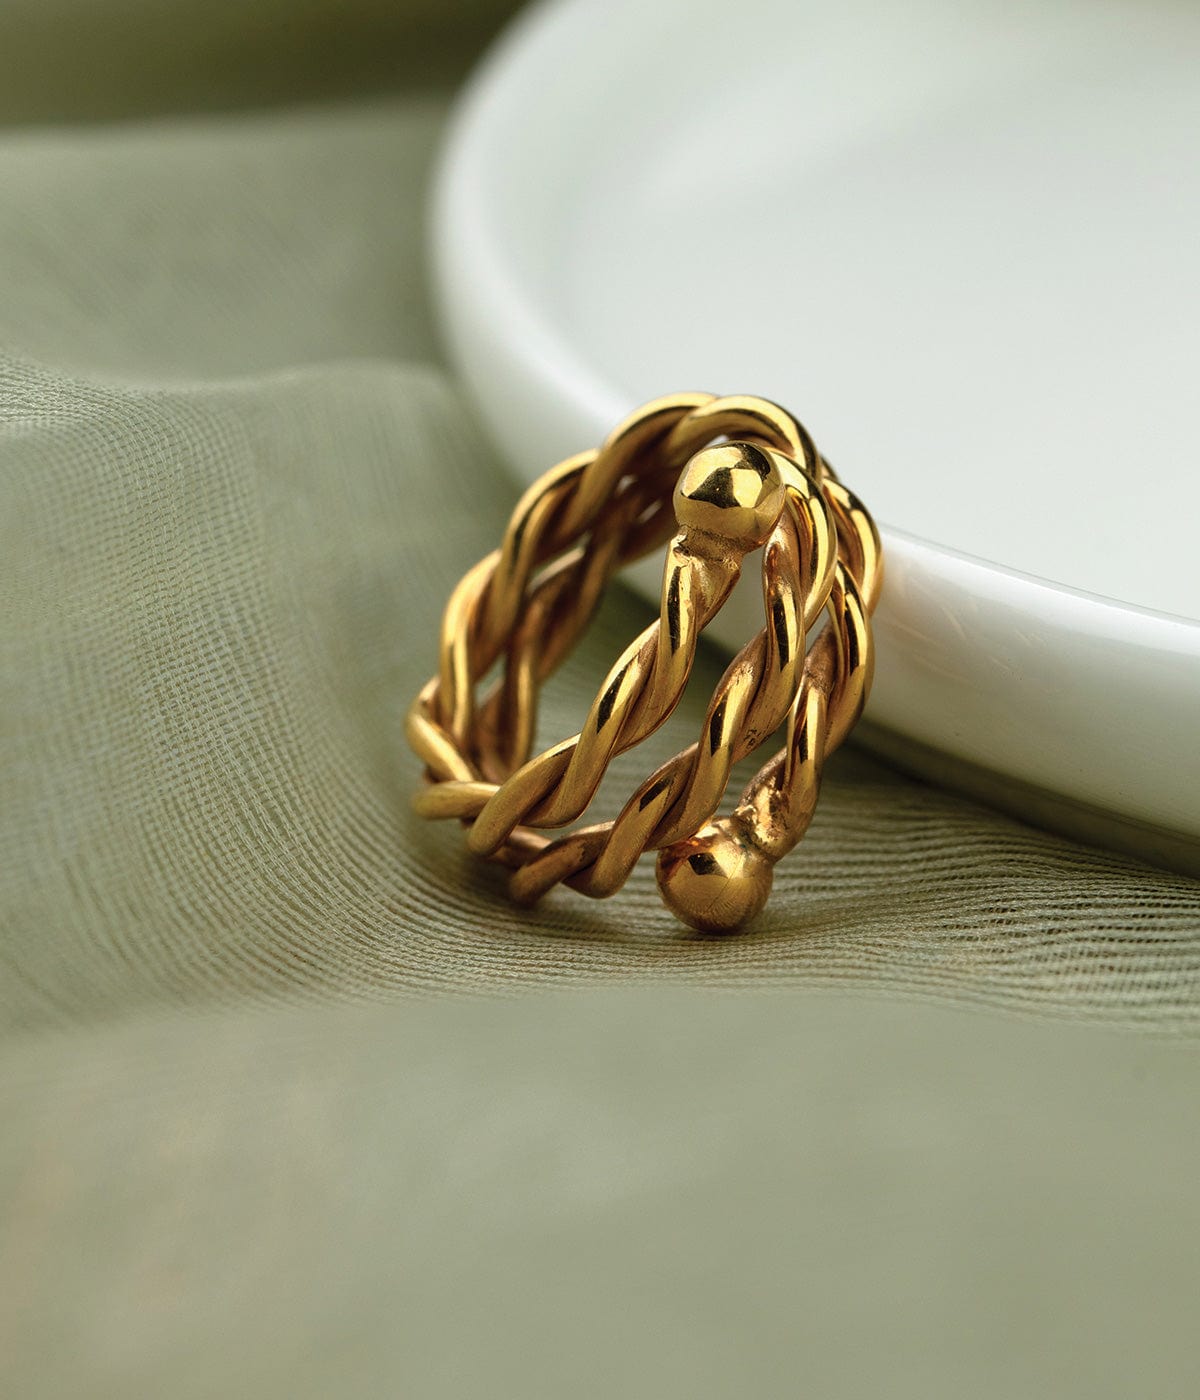 Sezen Ring With Rope Twirl Design 18k Gold Plated On Brass - ZEWAR Jewelry